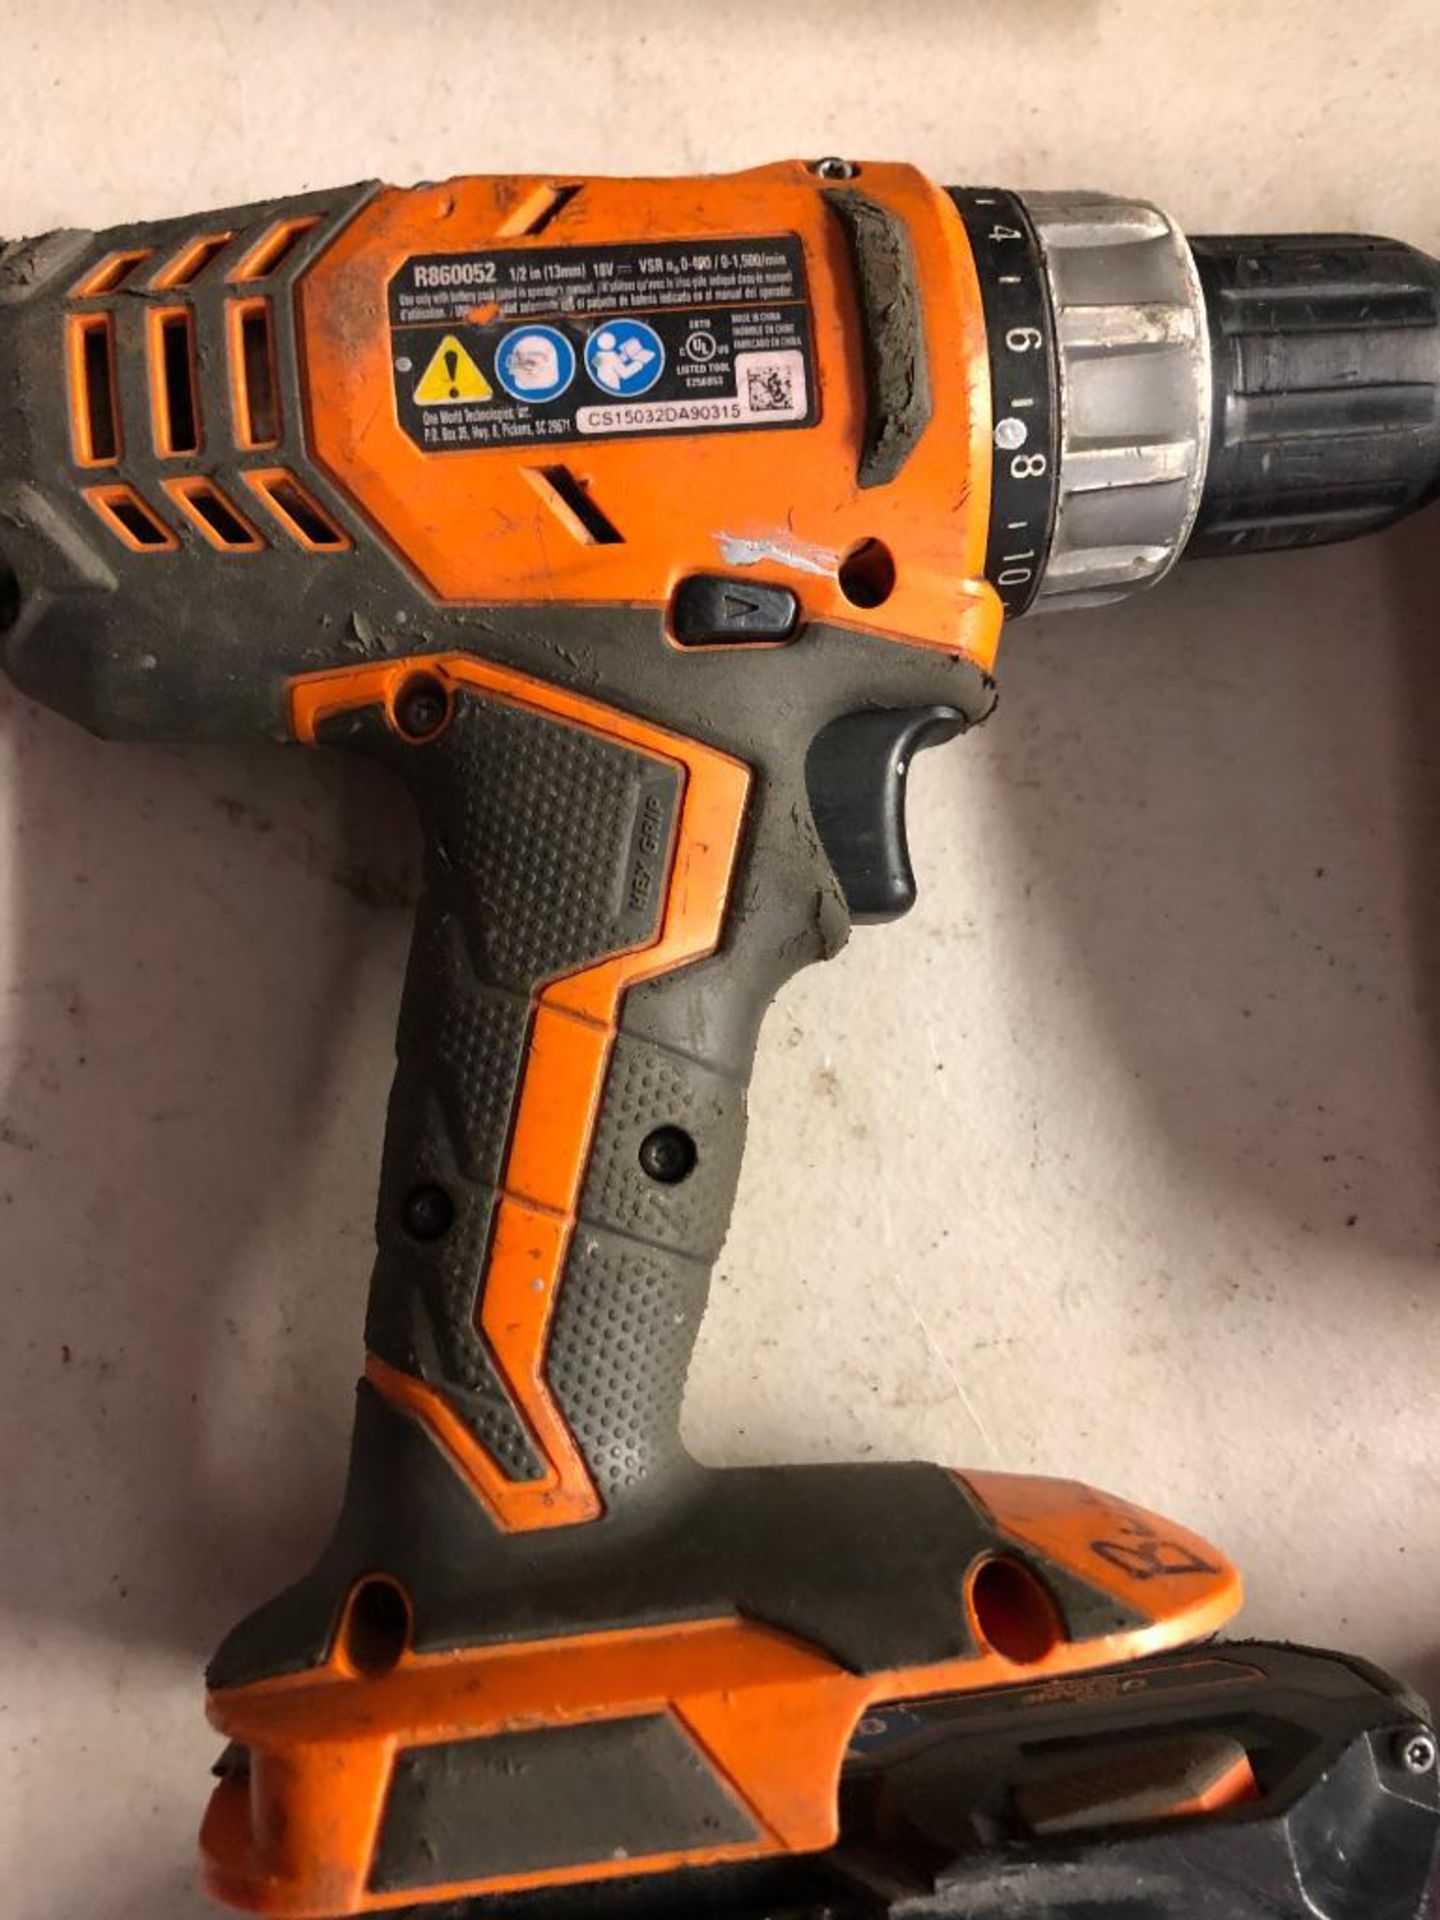 RIDGID 18 VOLT CORDLESS 1/2'' DRILL, MODEL R860052, W/ (2) BATTERIES AND A CHARGER - Image 2 of 3